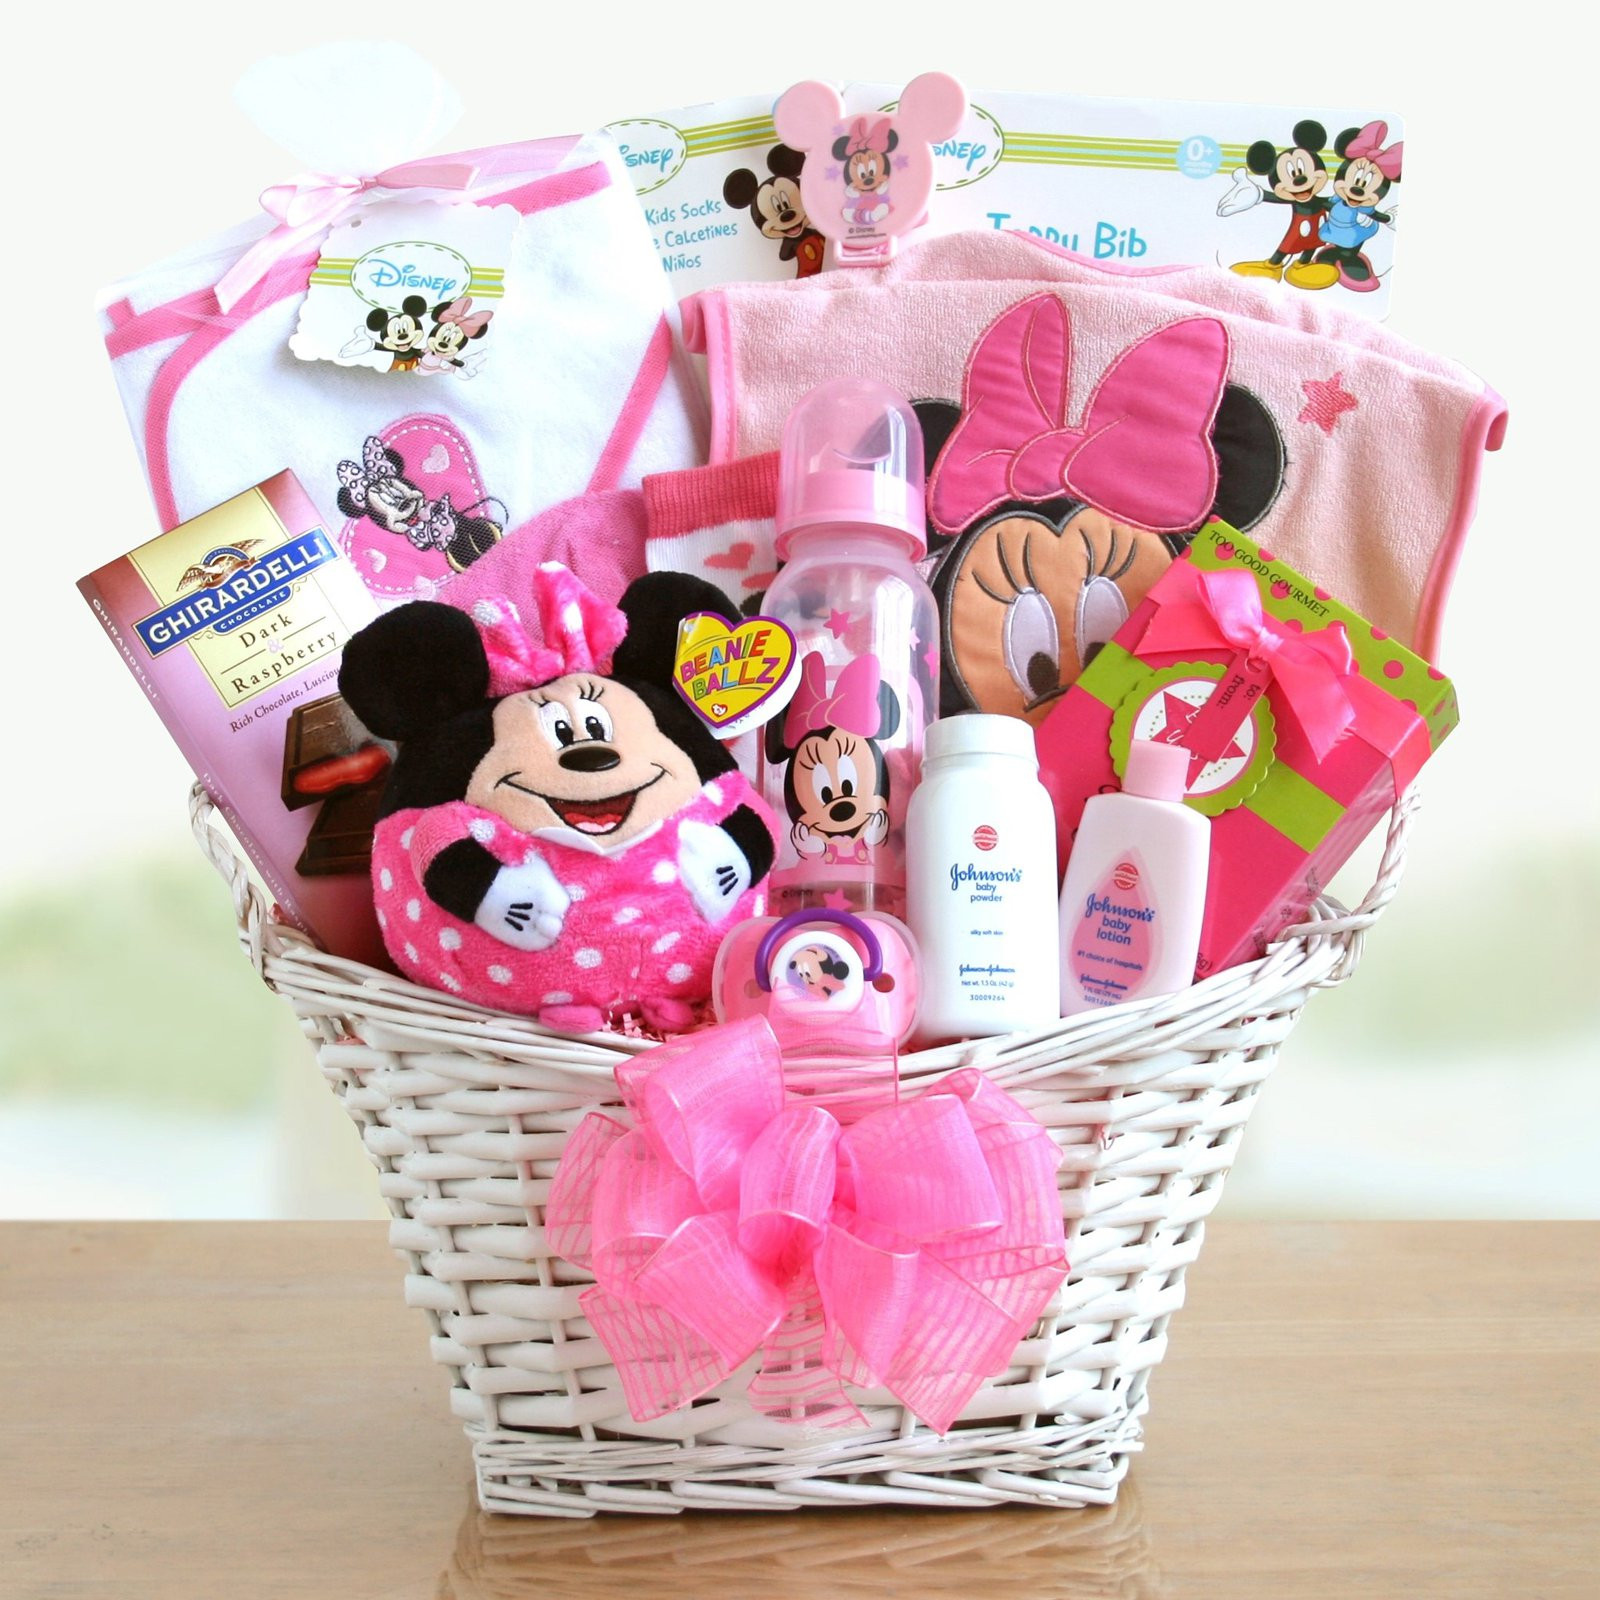 Gift Baskets Ideas For Girls
 Minnie Mouse Baby Girl Gift Basket Gift Baskets by